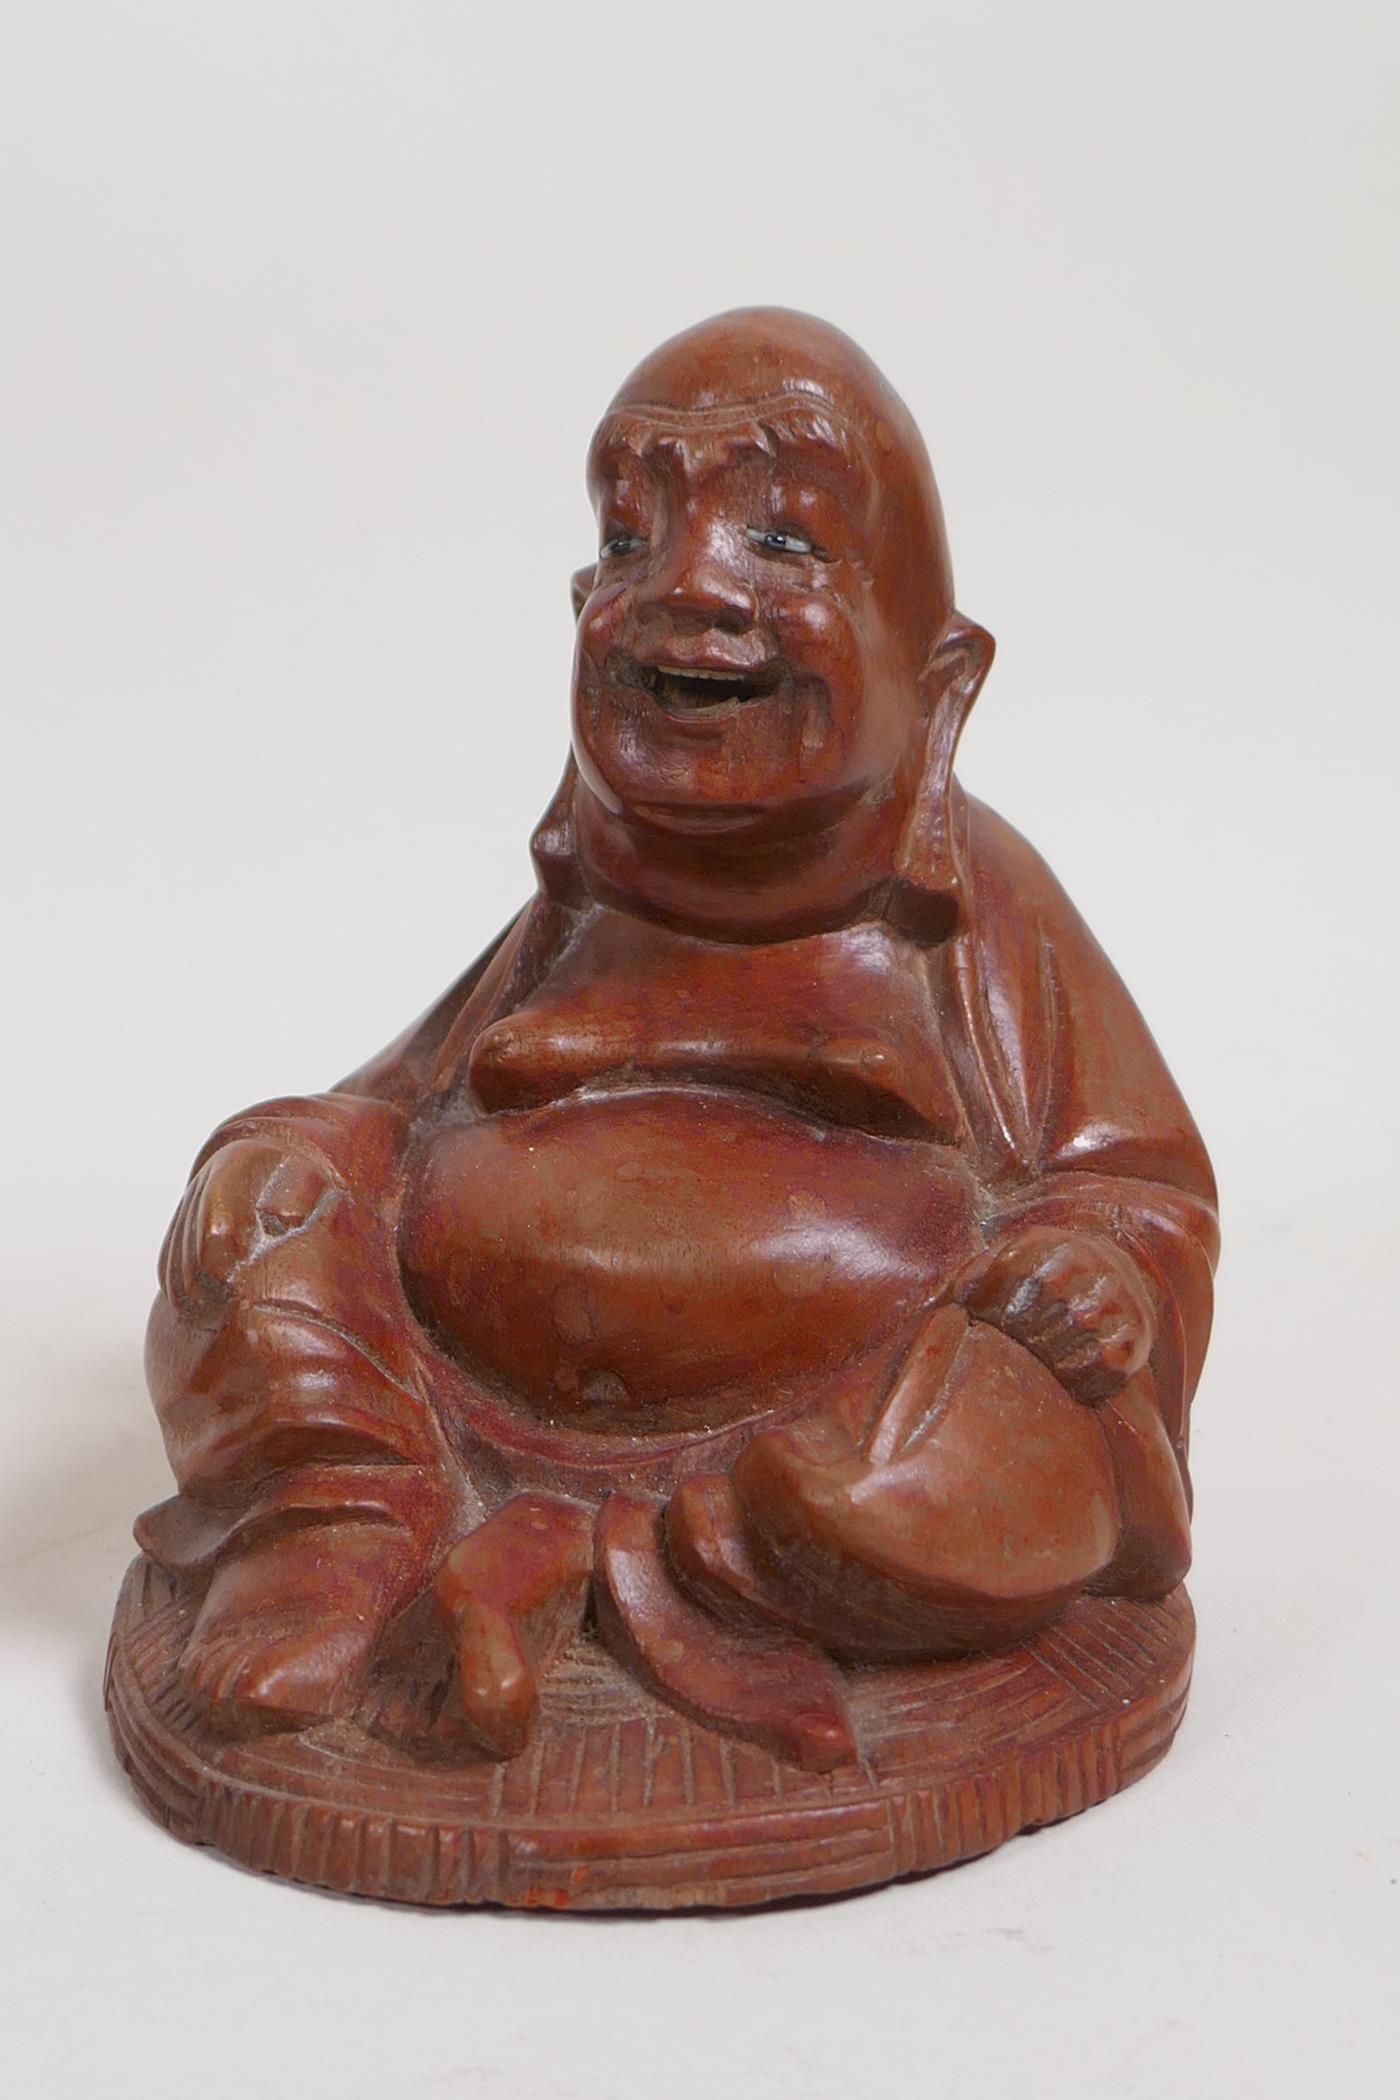 Seven Chinese carved hardwood figures, with depictions of Shao Lao and Buddha, largest 9½" high, AF - Image 8 of 8